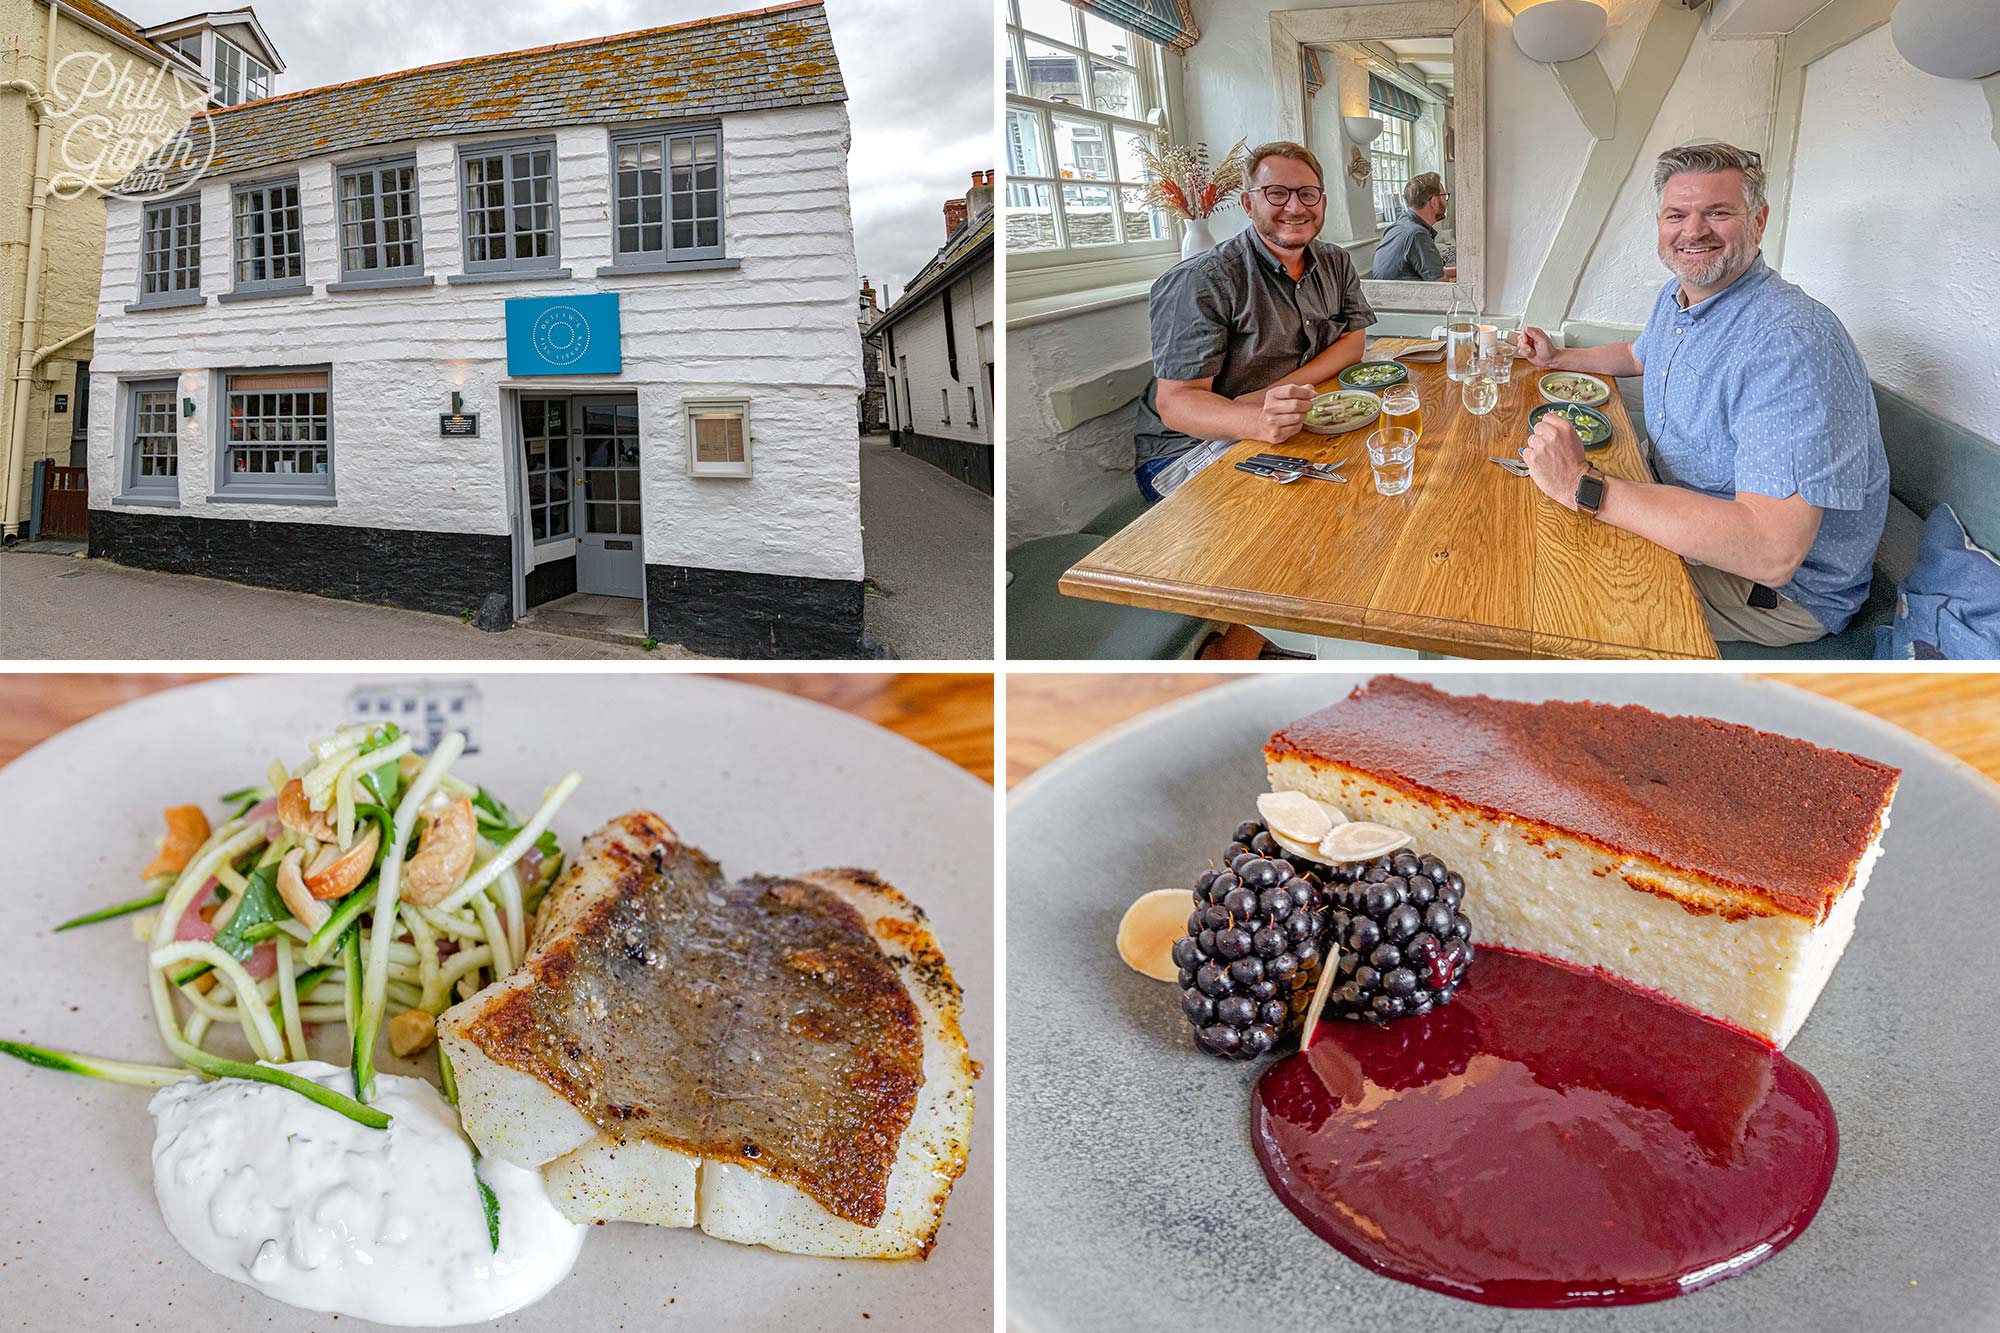 Port Issac is a foodie destination - we booked Outlaw’s Fish Kitchen for a delicious lunch